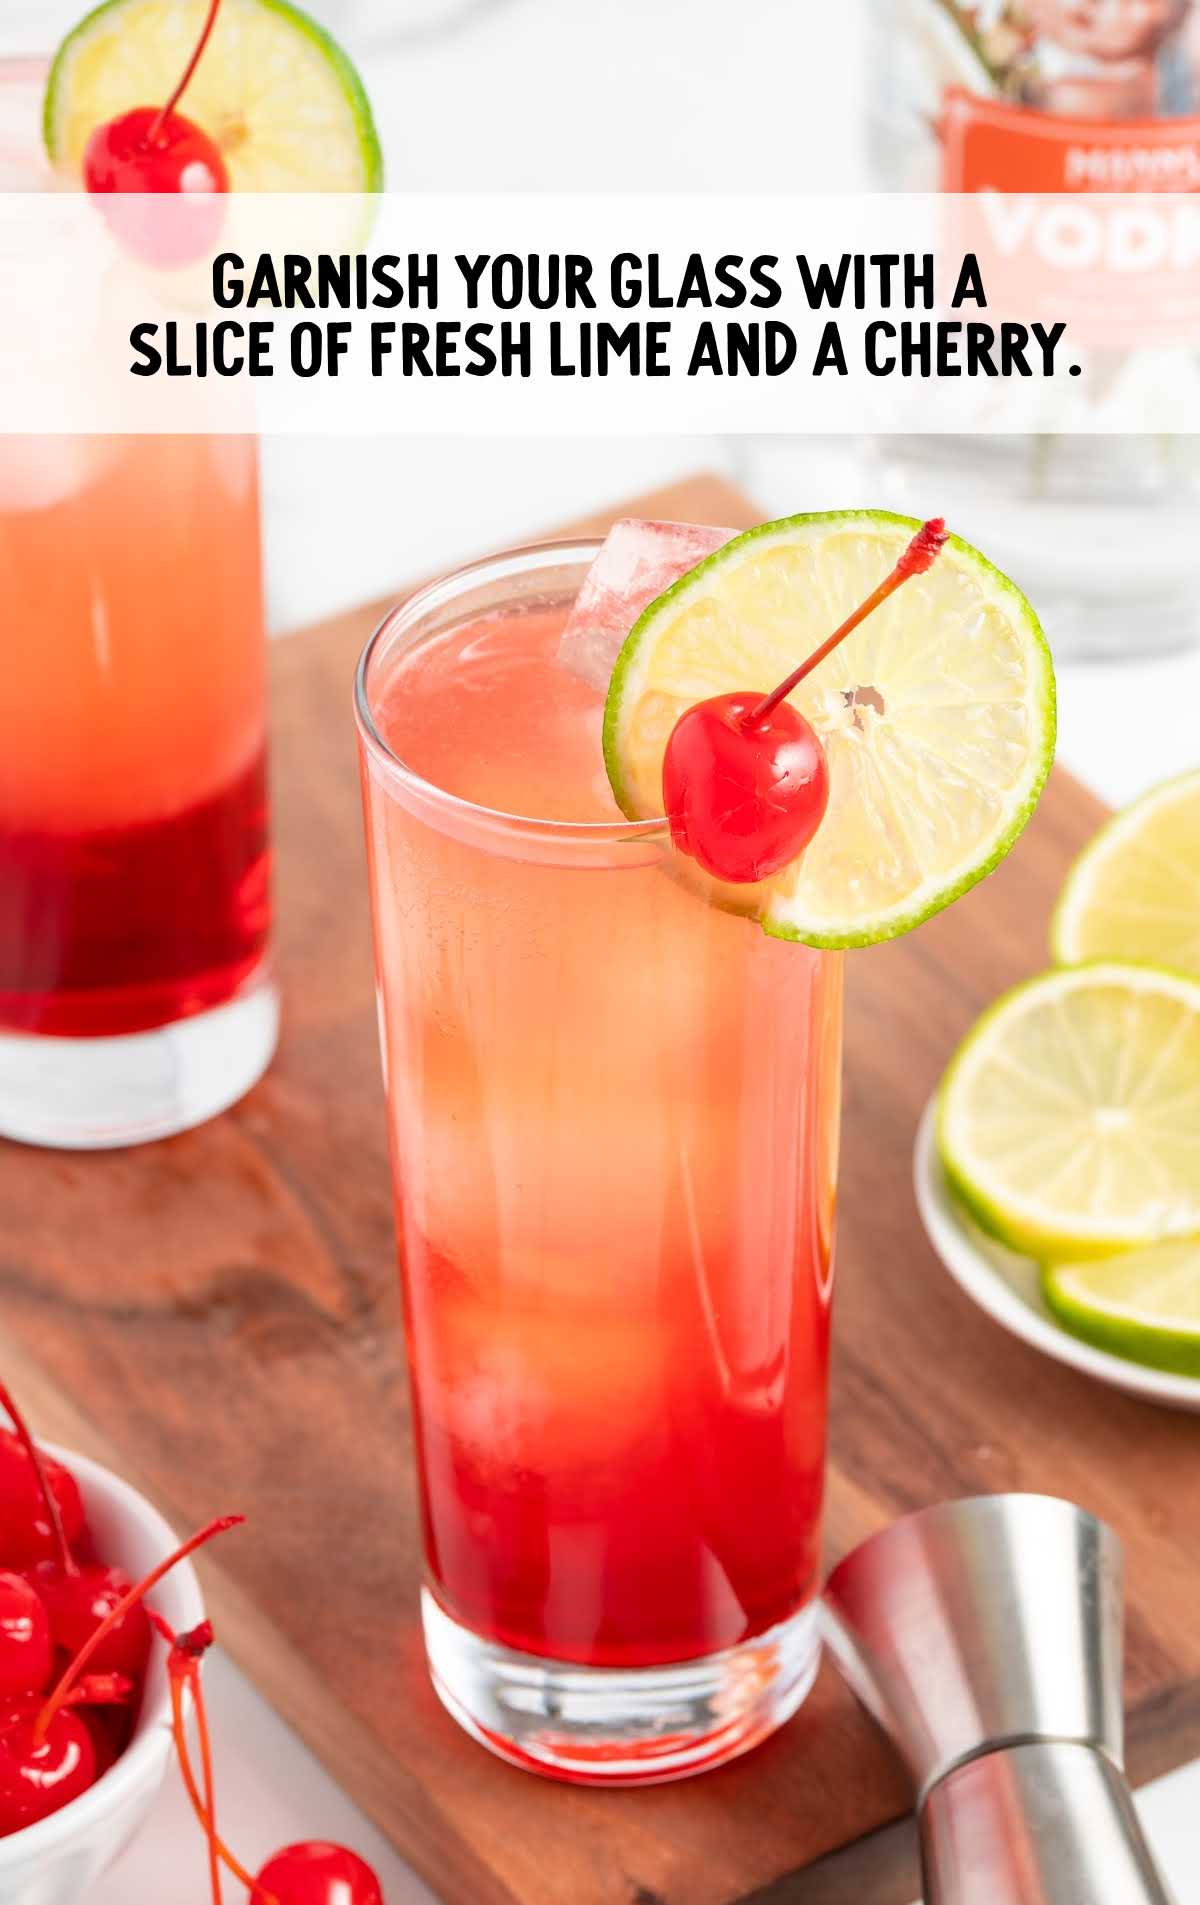 slice of lime and cherry garnished on the glass